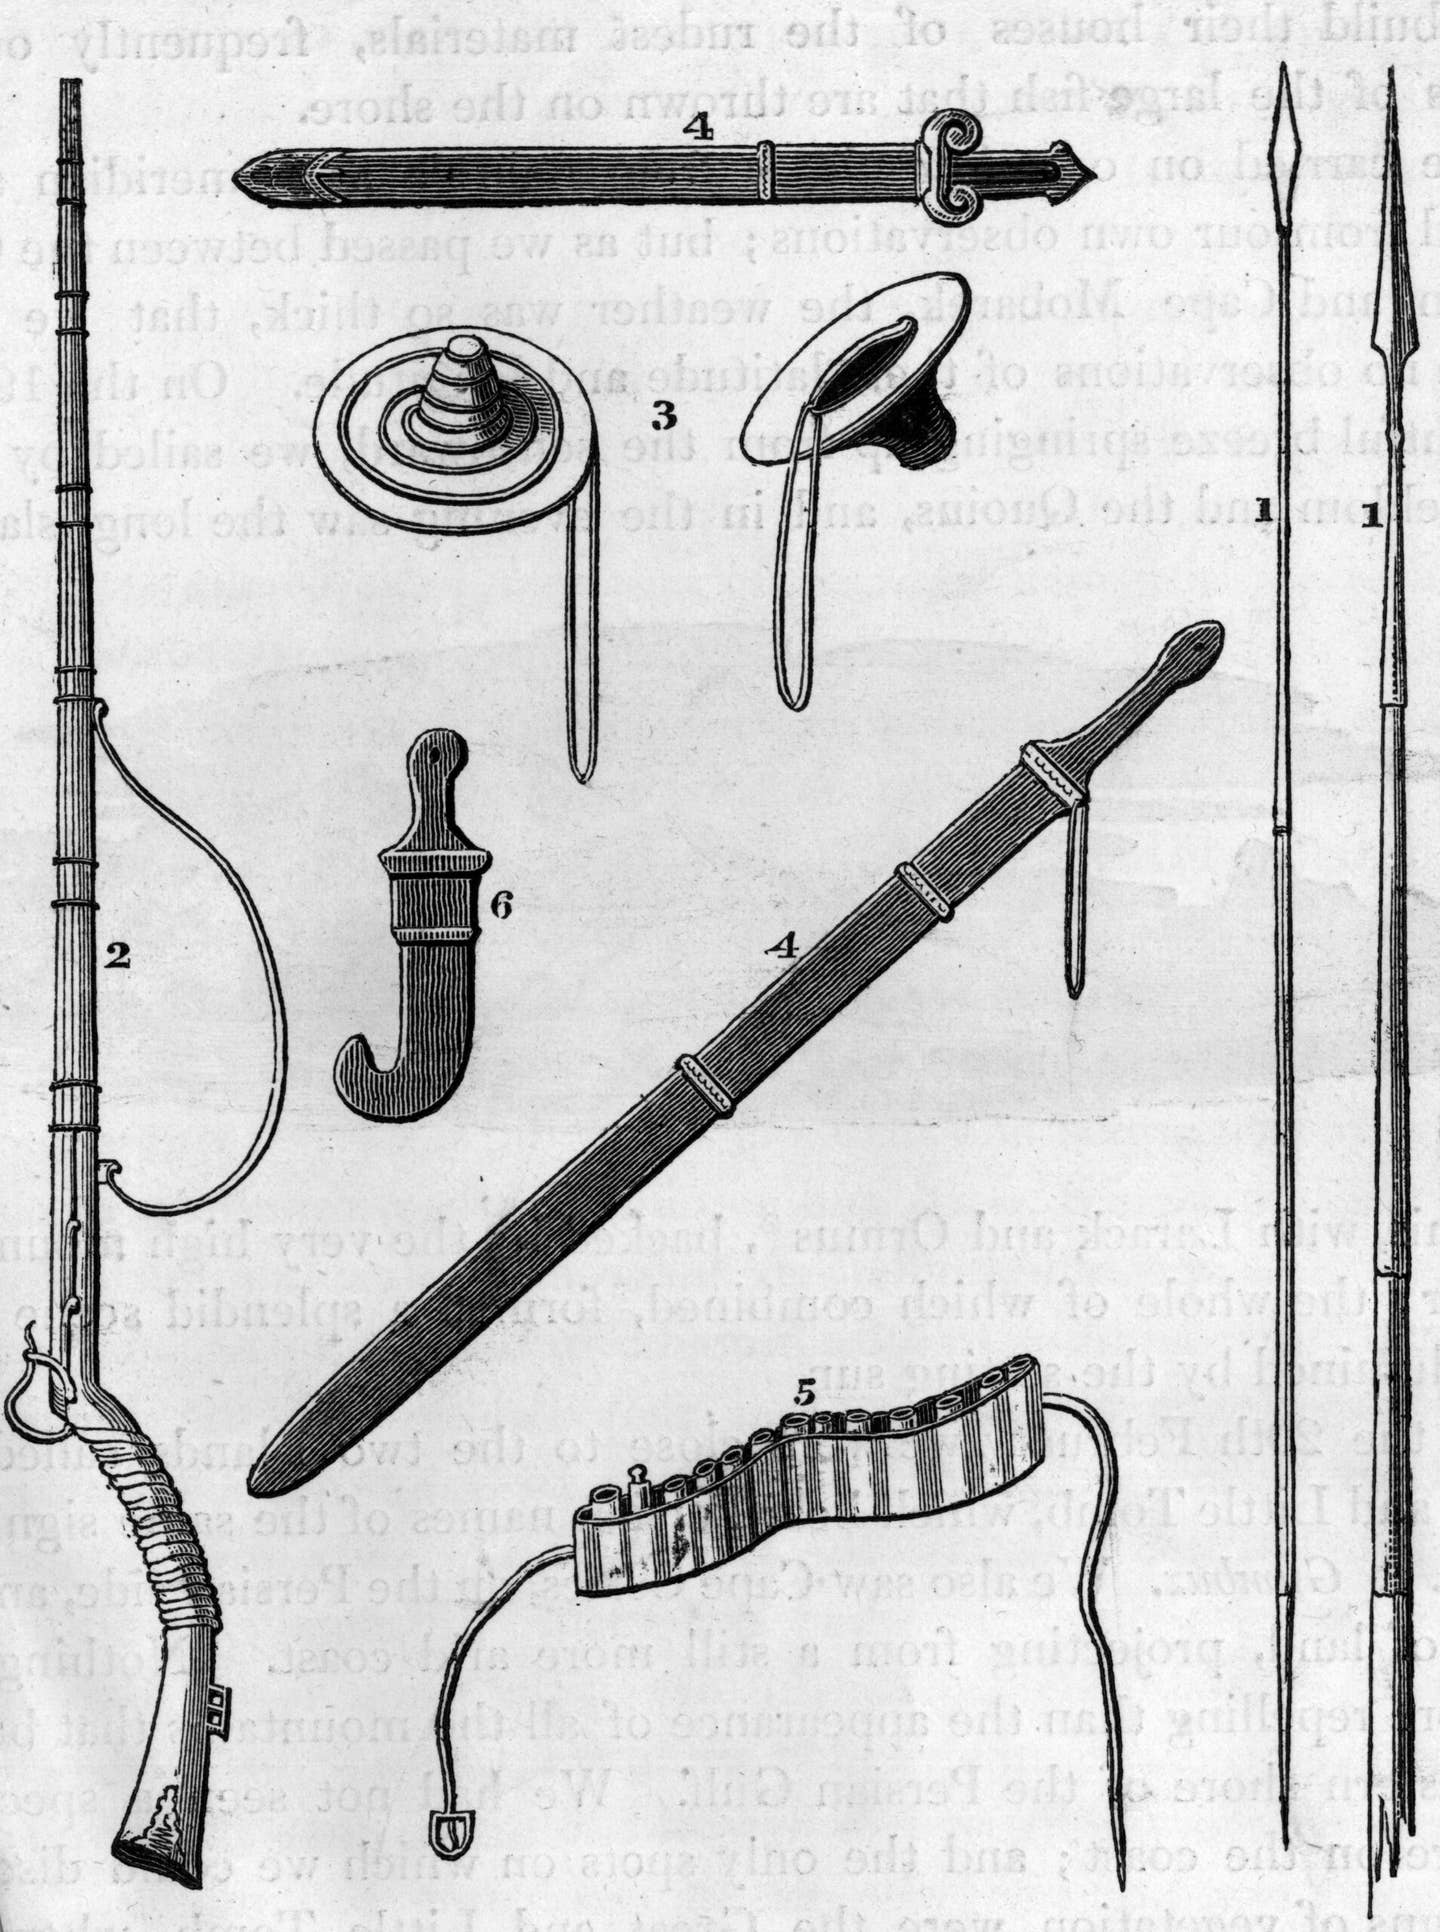 An 1818 print showing various weapons said to have been taken from Arab pirates; spears, swords, hand shields, a musket, a cartridge belt, and a dagger. <em>Photo by Henry Guttmann Collection/Hulton Archive/Getty Images</em>